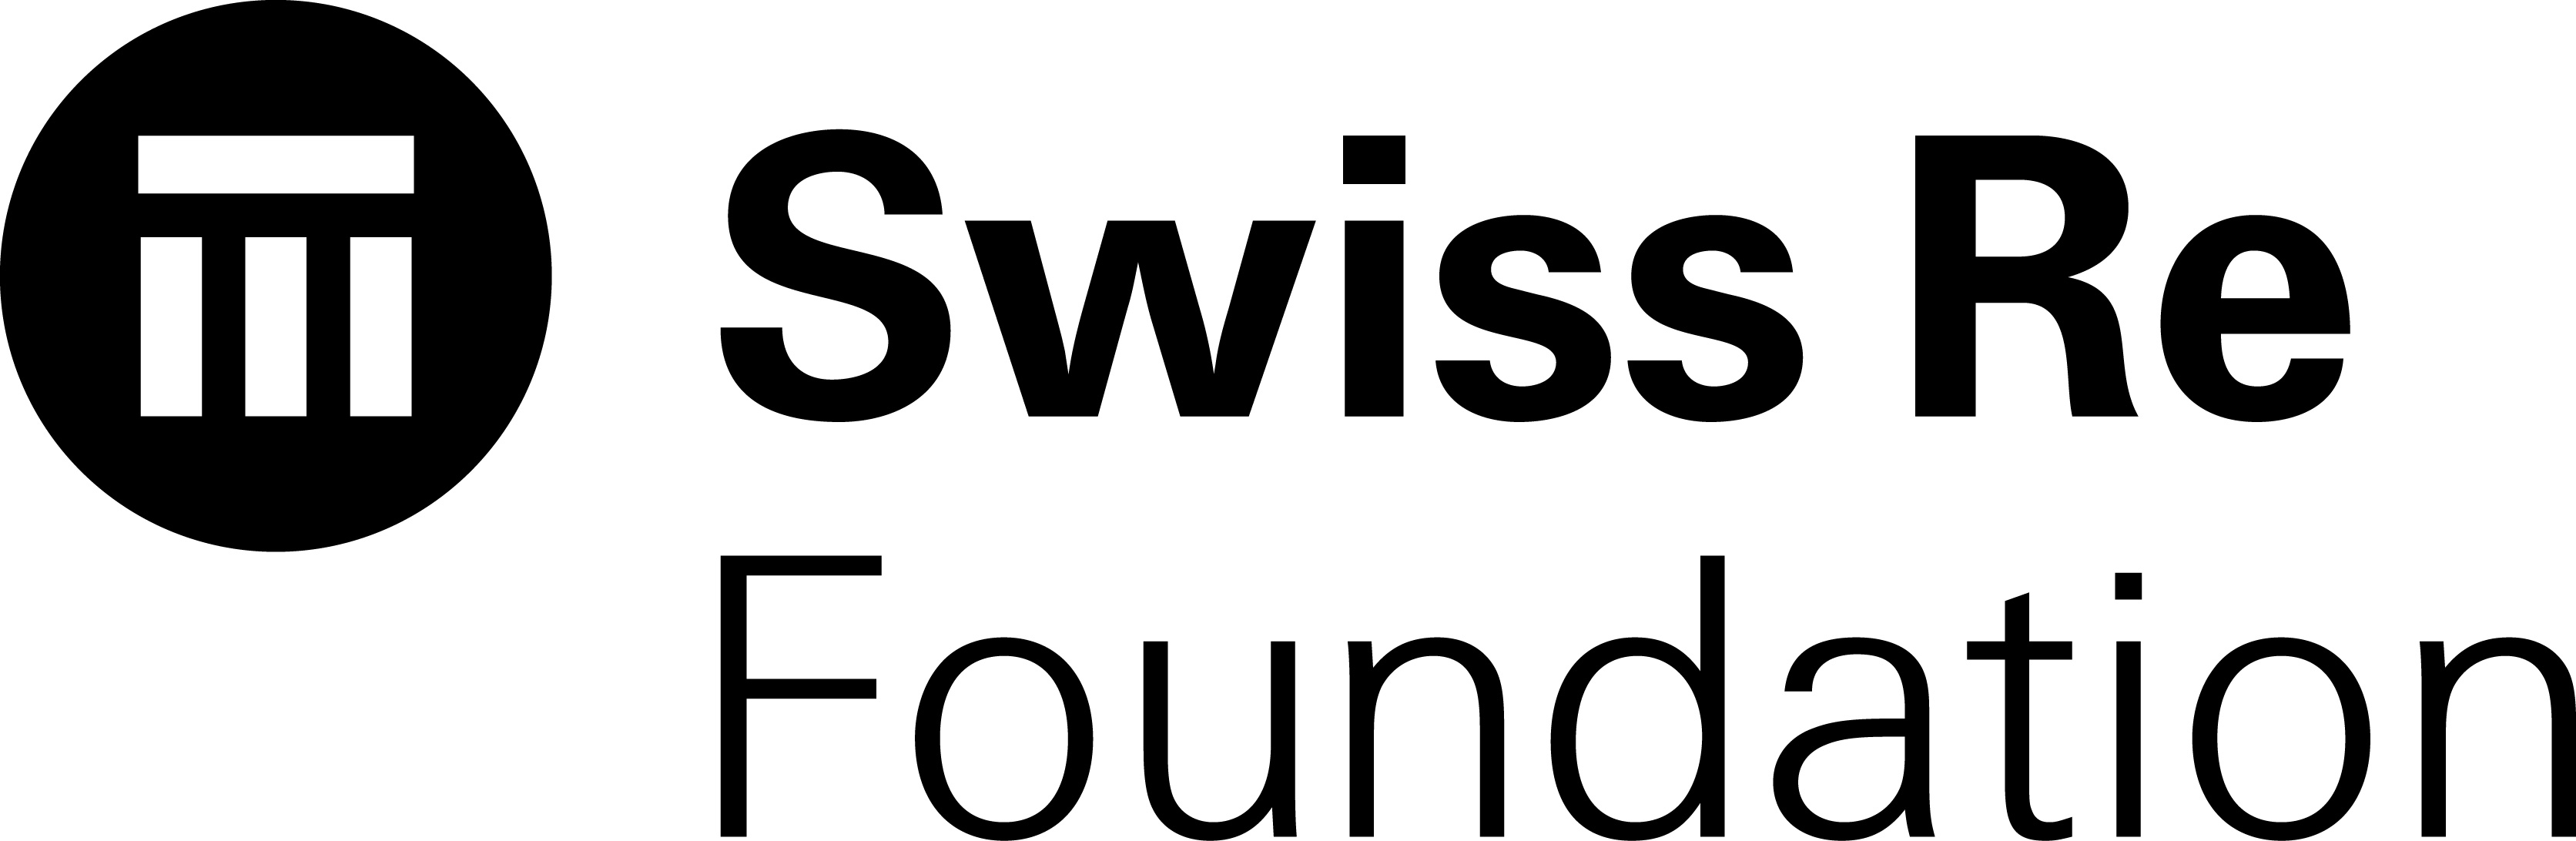 Picture. Swiss Re Foundation - Swiss Re, Transparent background PNG HD thumbnail